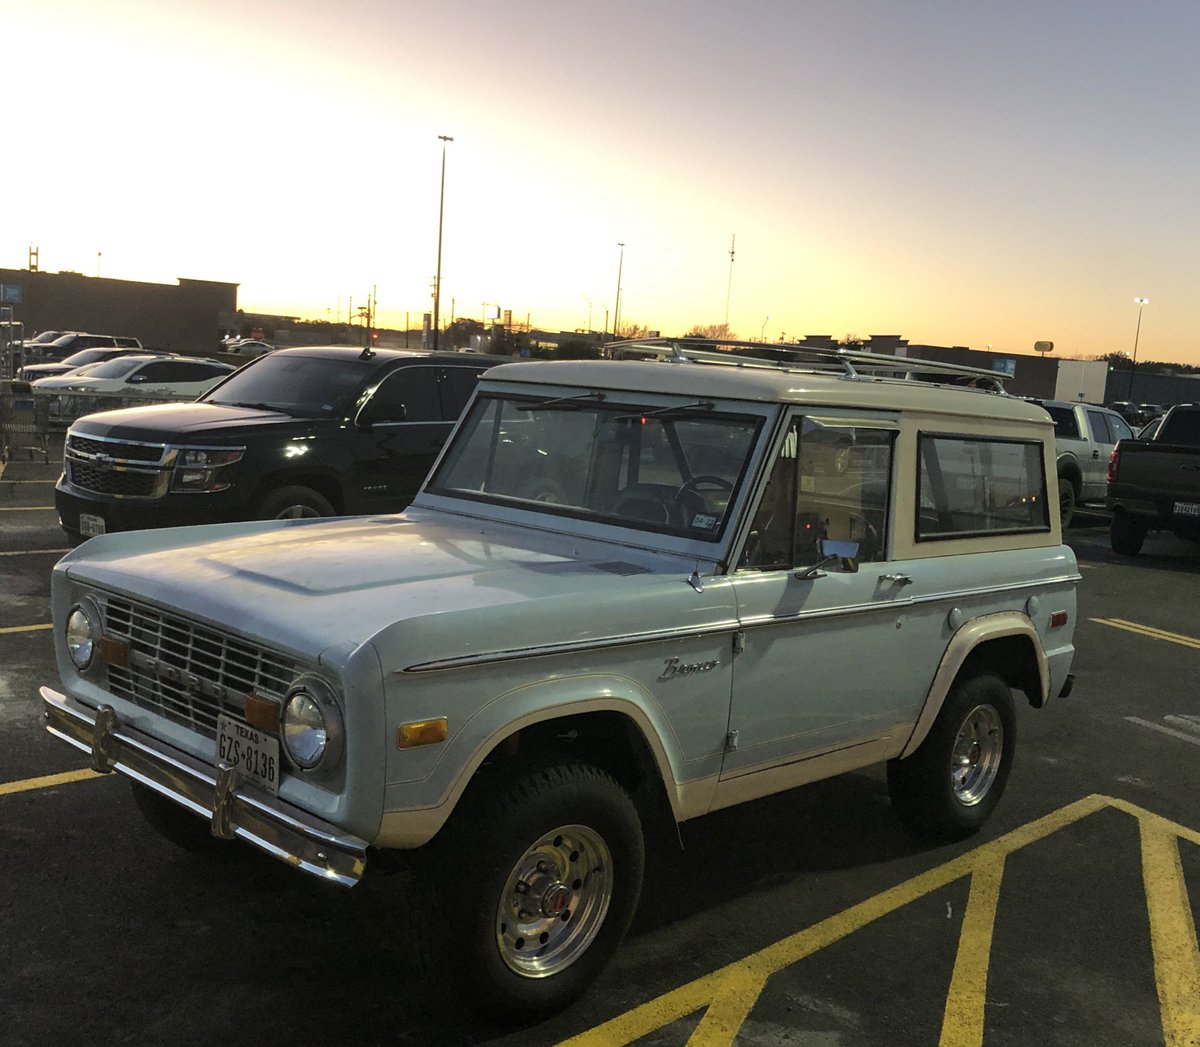 It’s been a few months so I took Baby on a date to Walmart tonight.  #76Bronco #VintageBronco #EarlyBronco #FordBronco #Texas